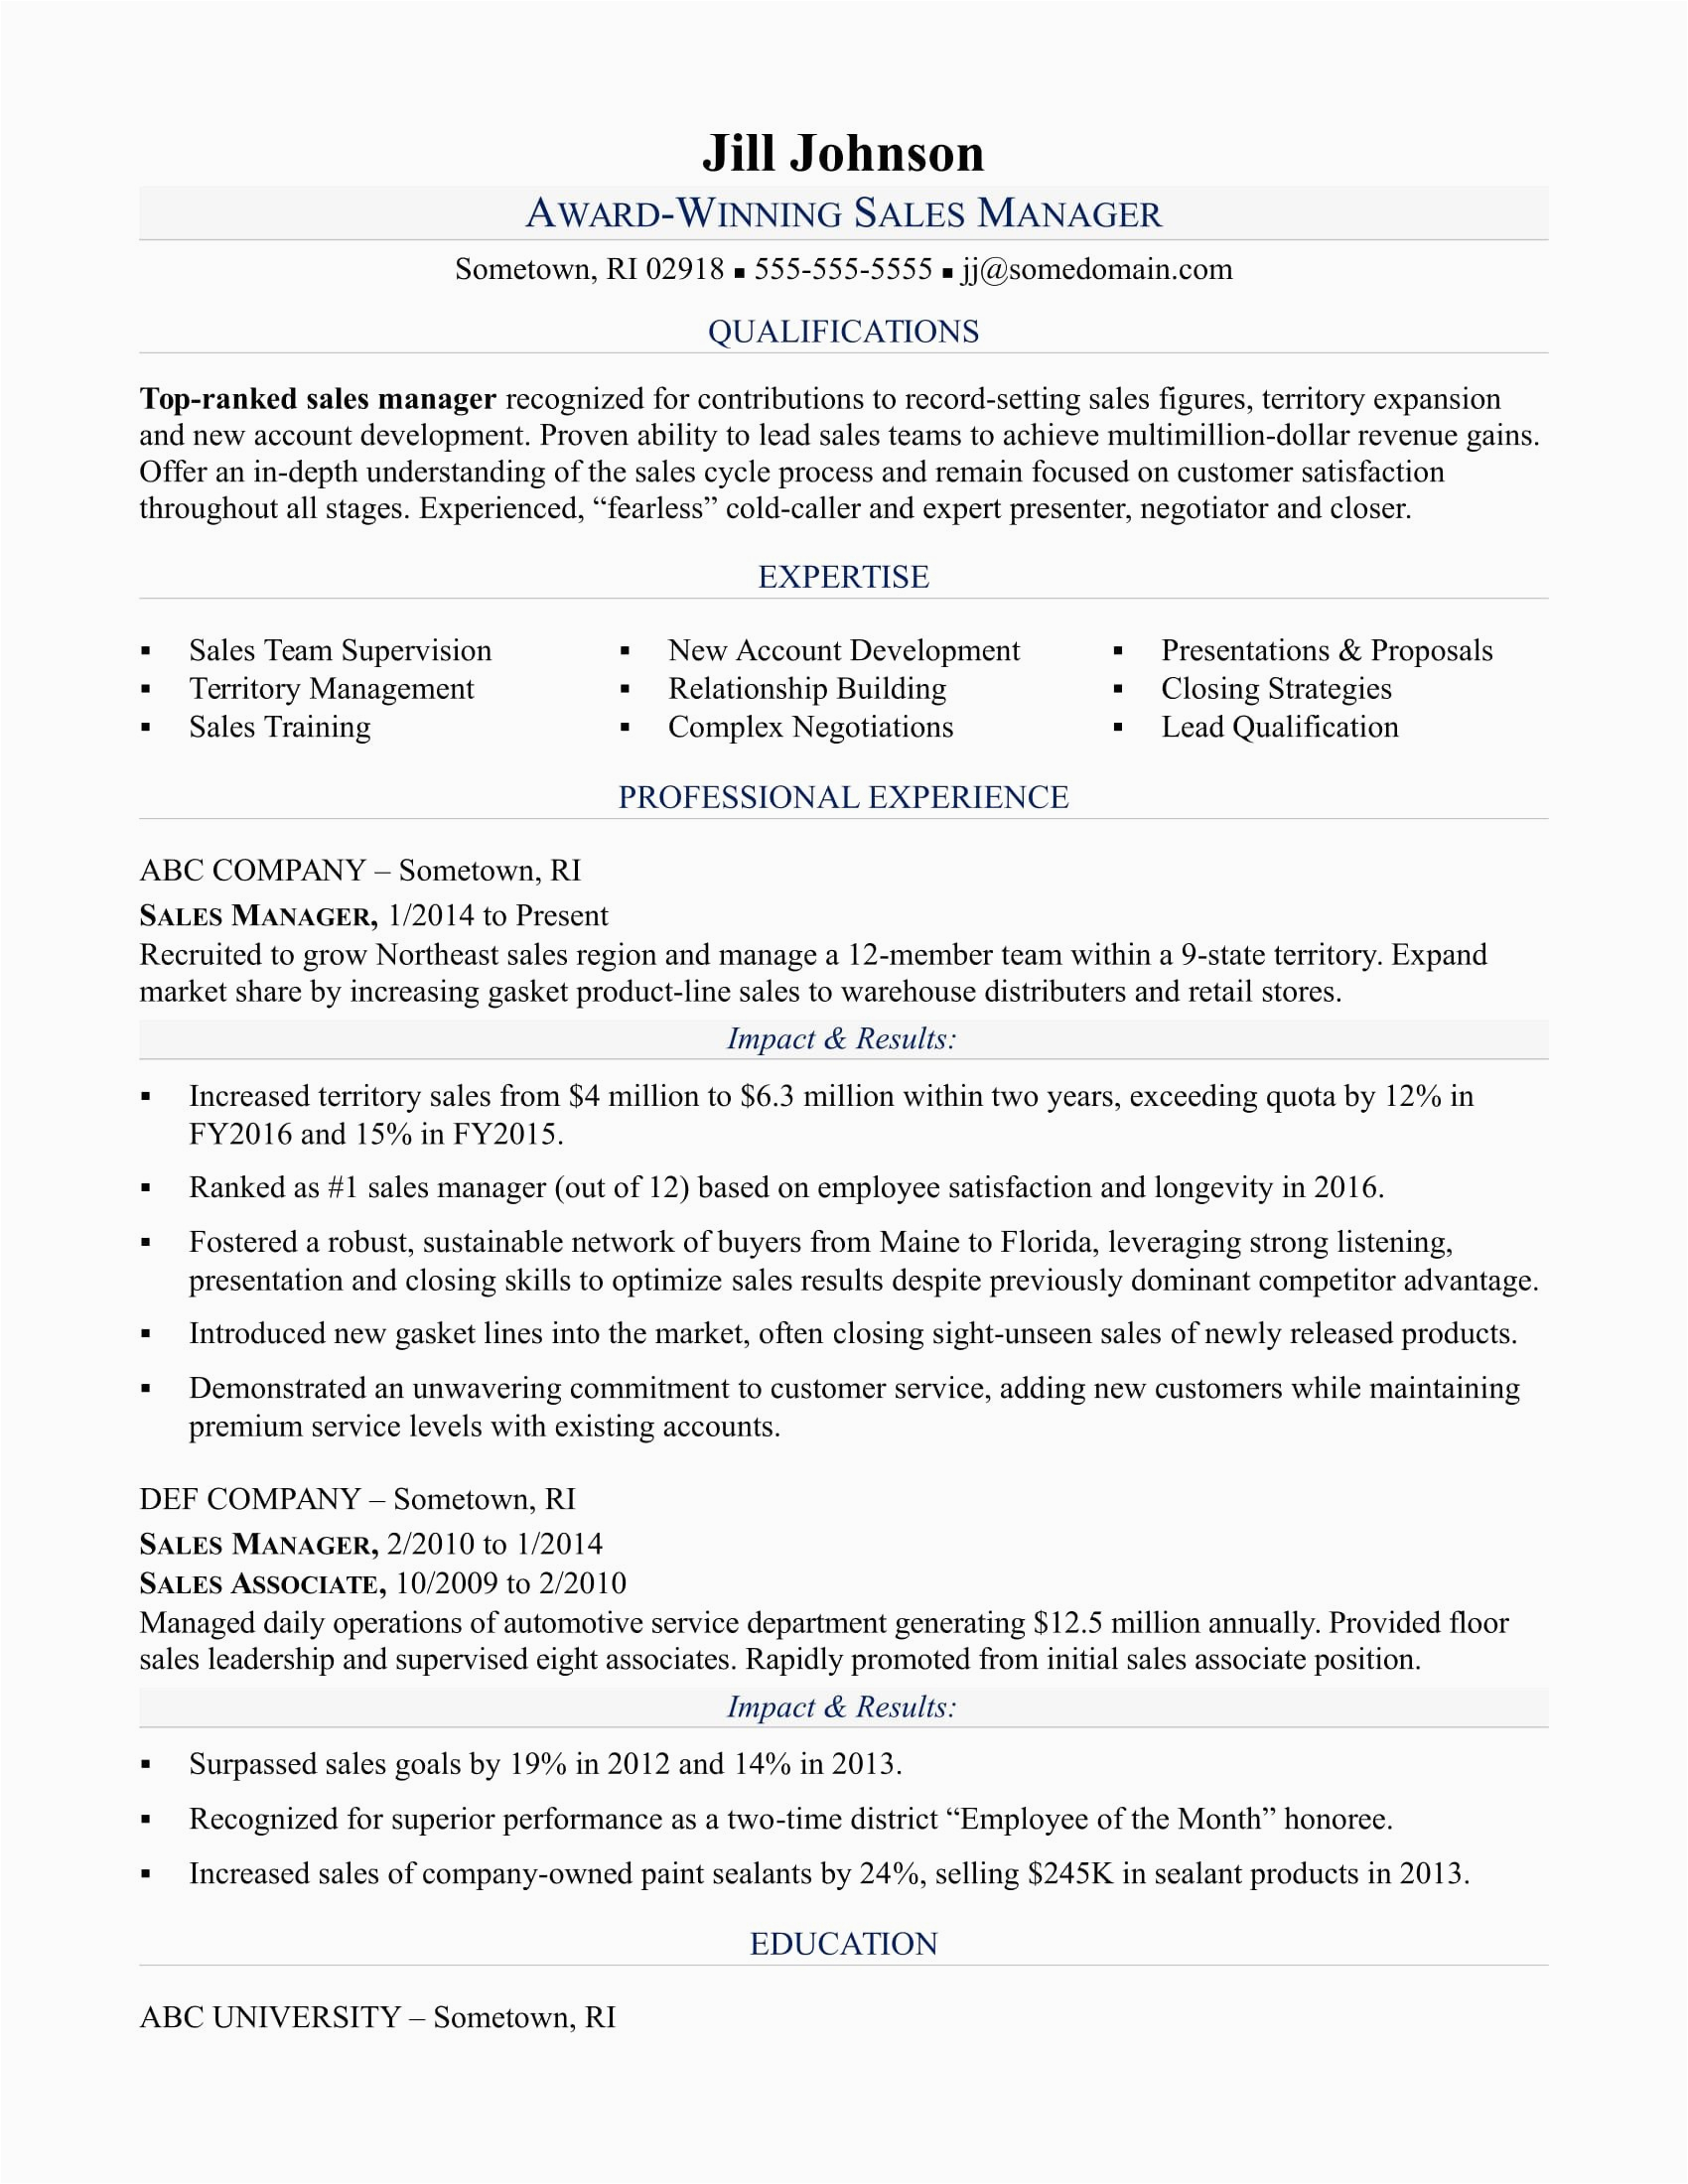 Sample Resume Promotion within Same Company √ 20 Resume for Promotion within Same Pany ™